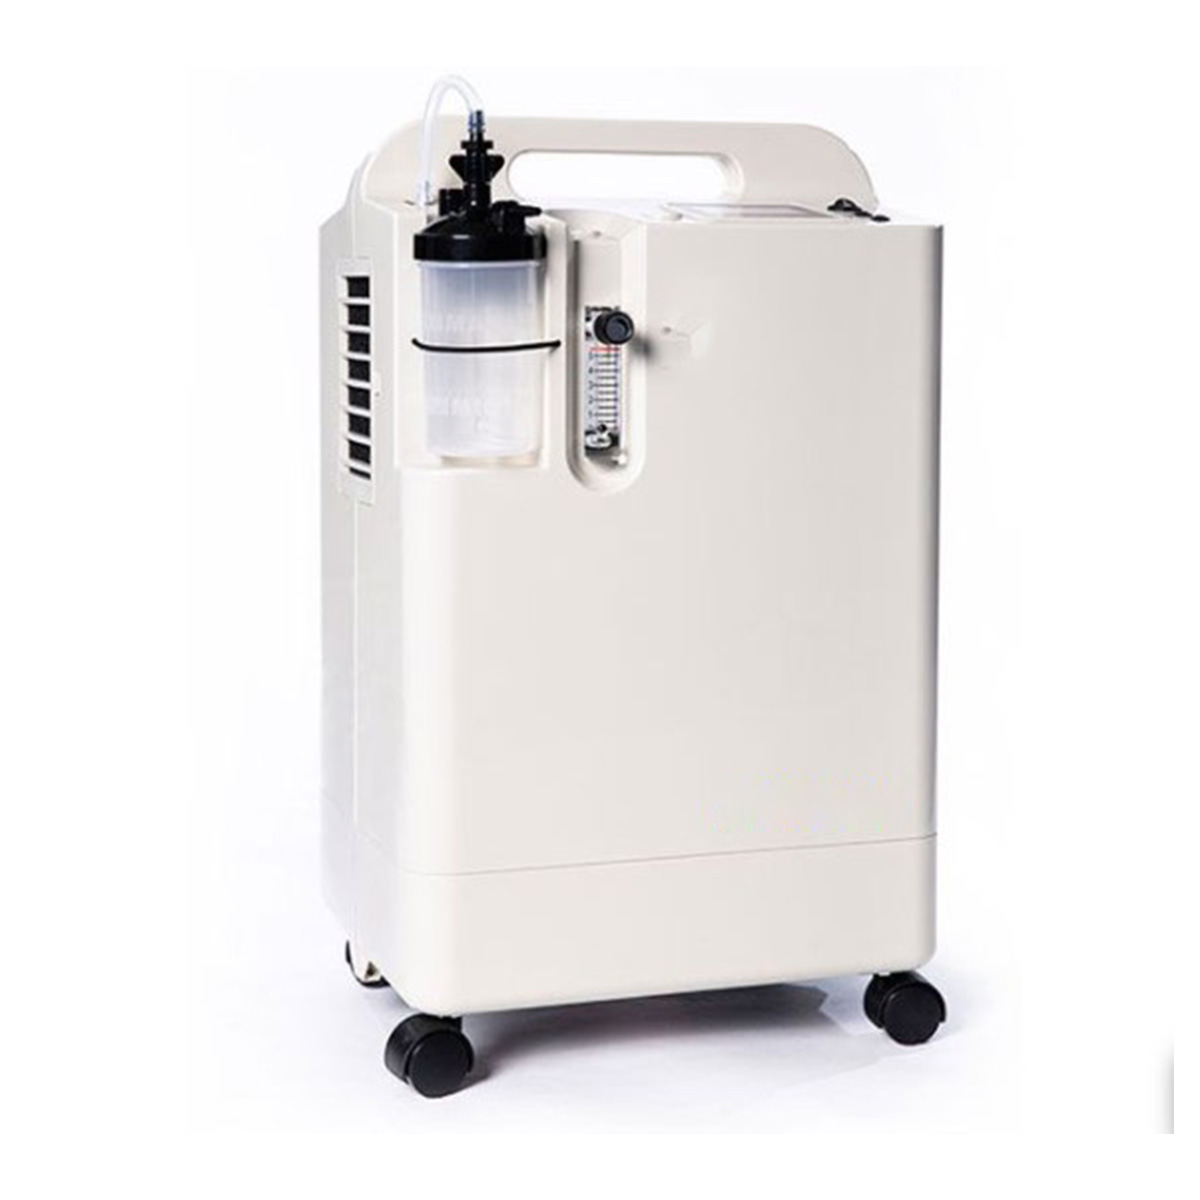 5 Longfian Oxygen Concentrator On Sale Suppliers, Service Provider in Dlf belvedere towers